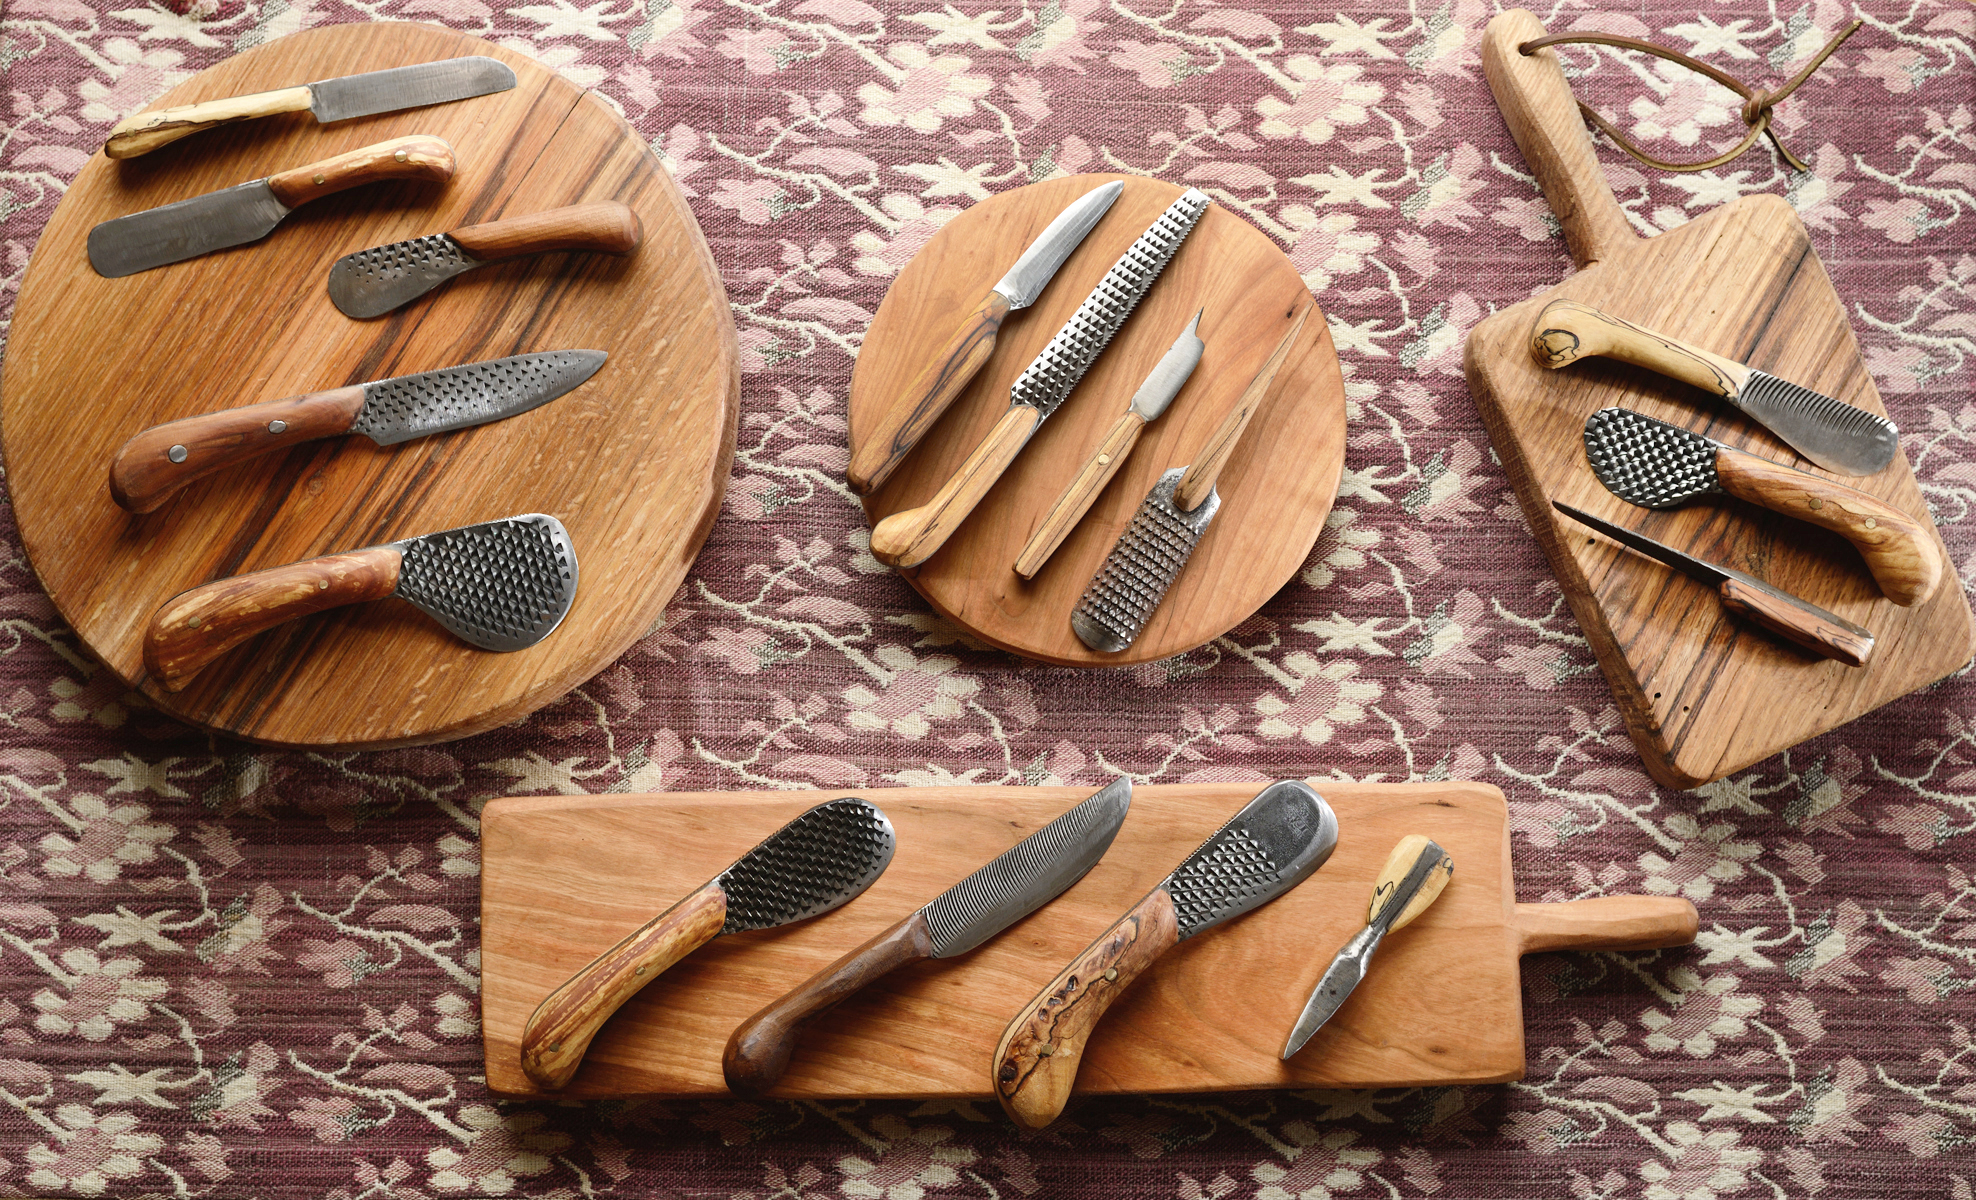 These Hand-Forged Kitchen Knives Are Works Of Rural Art